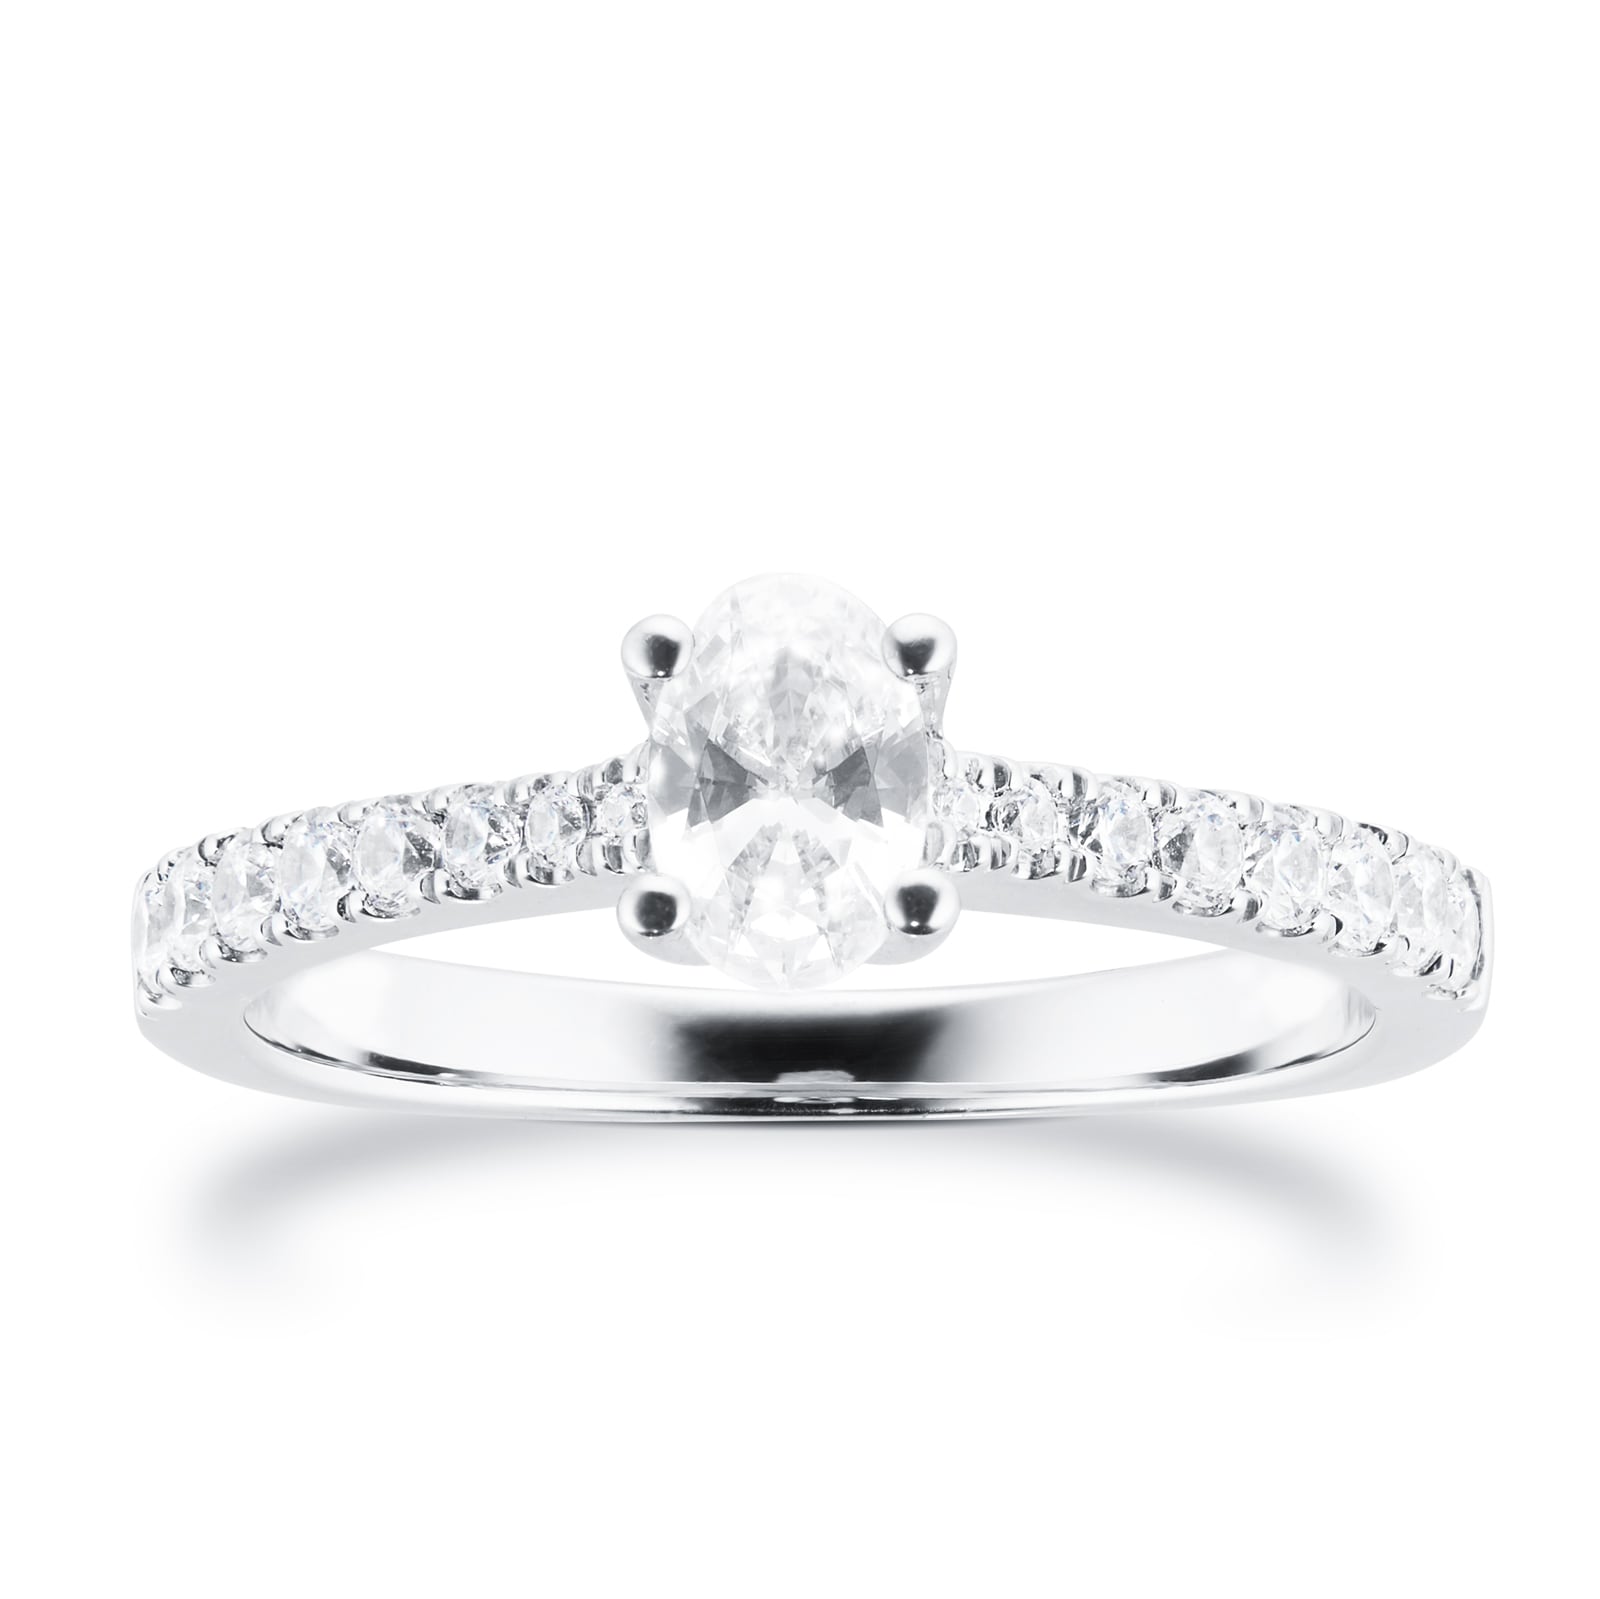 Platinum 0.70cttw Goldsmiths Brightest Diamond Oval Cut Solitaire Engagement Ring - Ring Size L